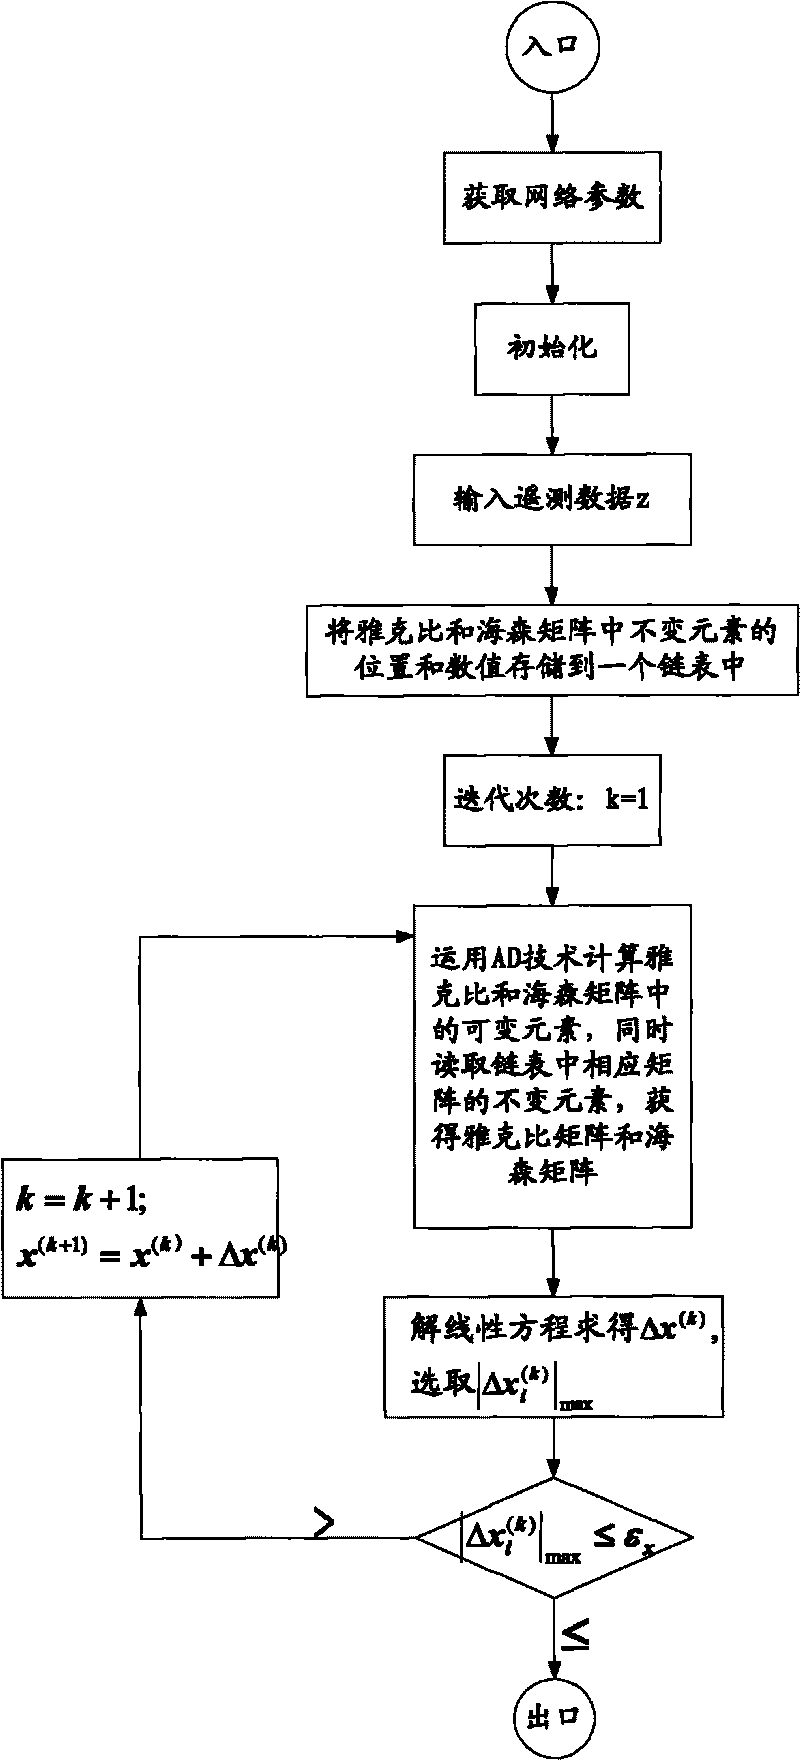 Automatic differentiation based power system state estimation method